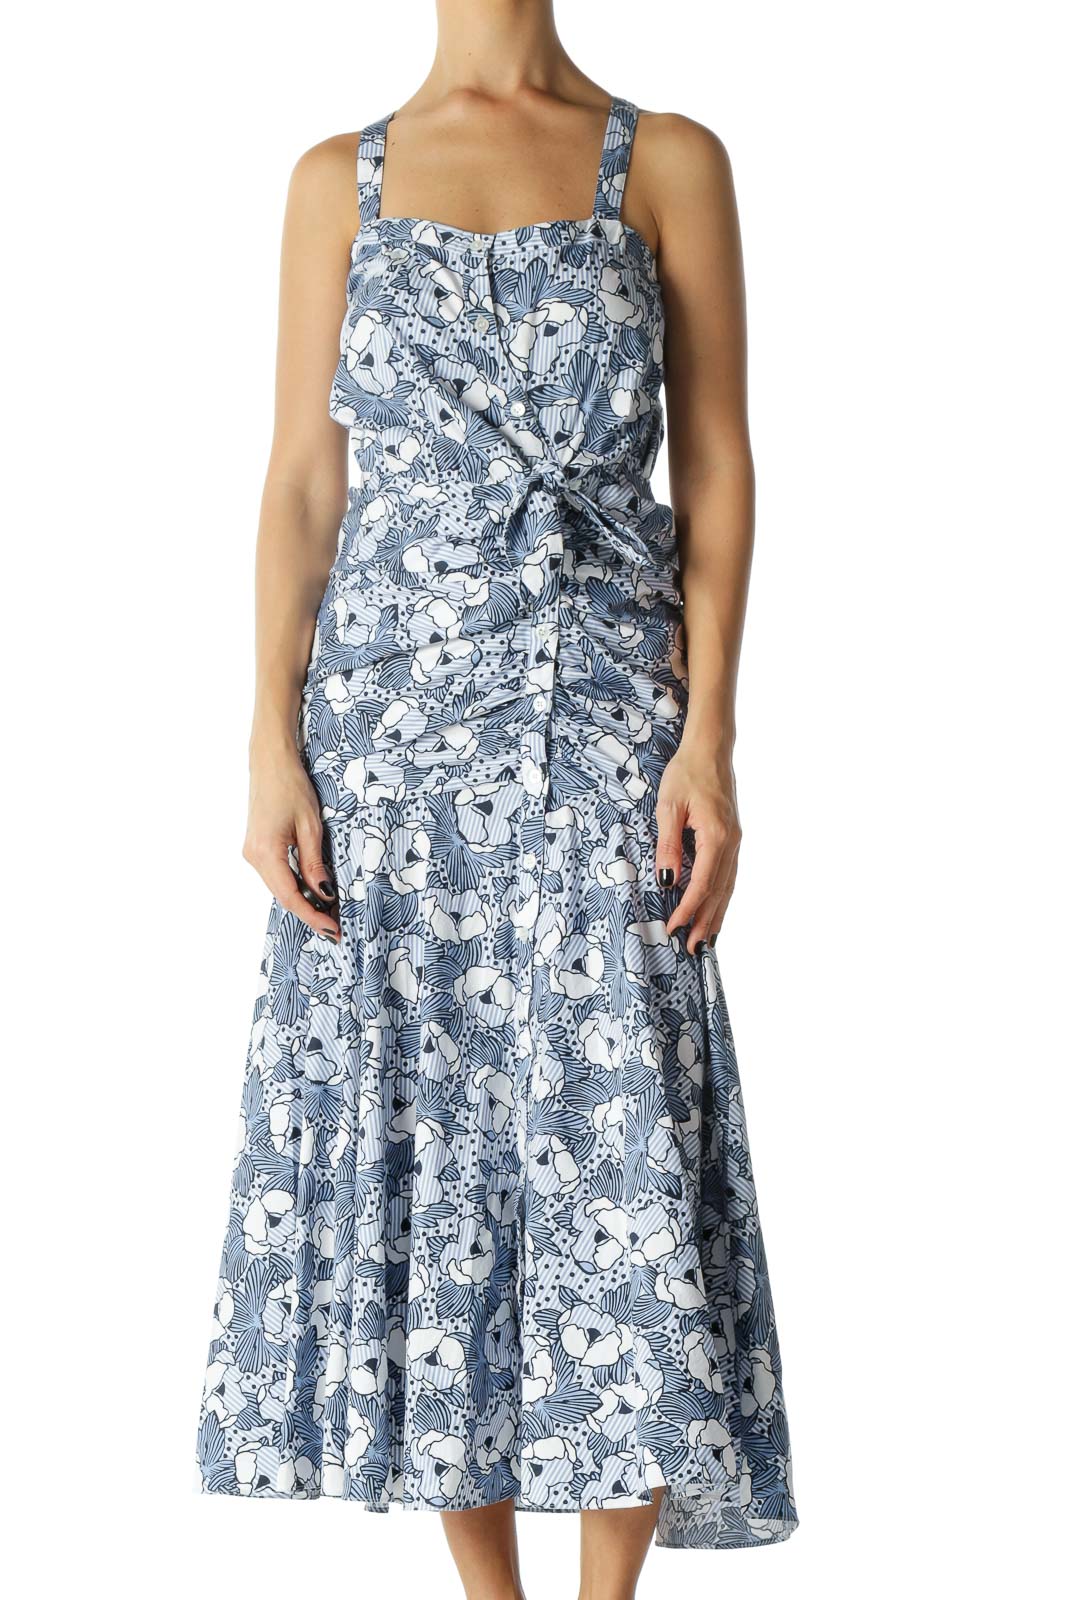 Blue and White Floral , Polka-Dot, and Stiped Print Spaghetti Strap Maxi Dress Front